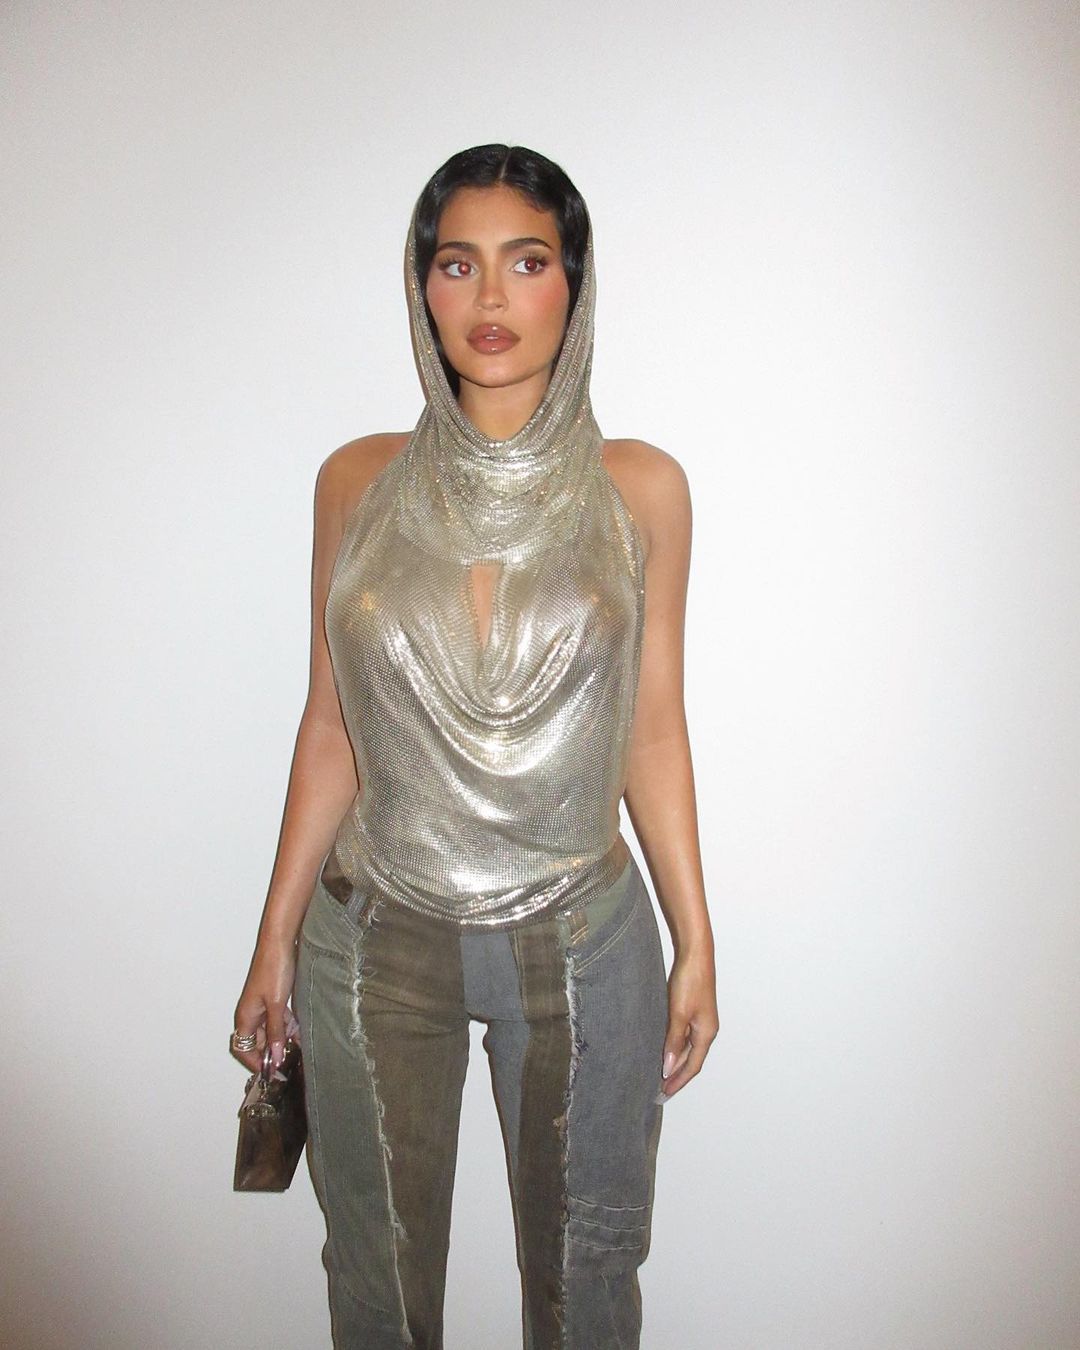 Kylie Jenner’s Dazzling Party Look Involves a Hooded Top and Unexpected Pants